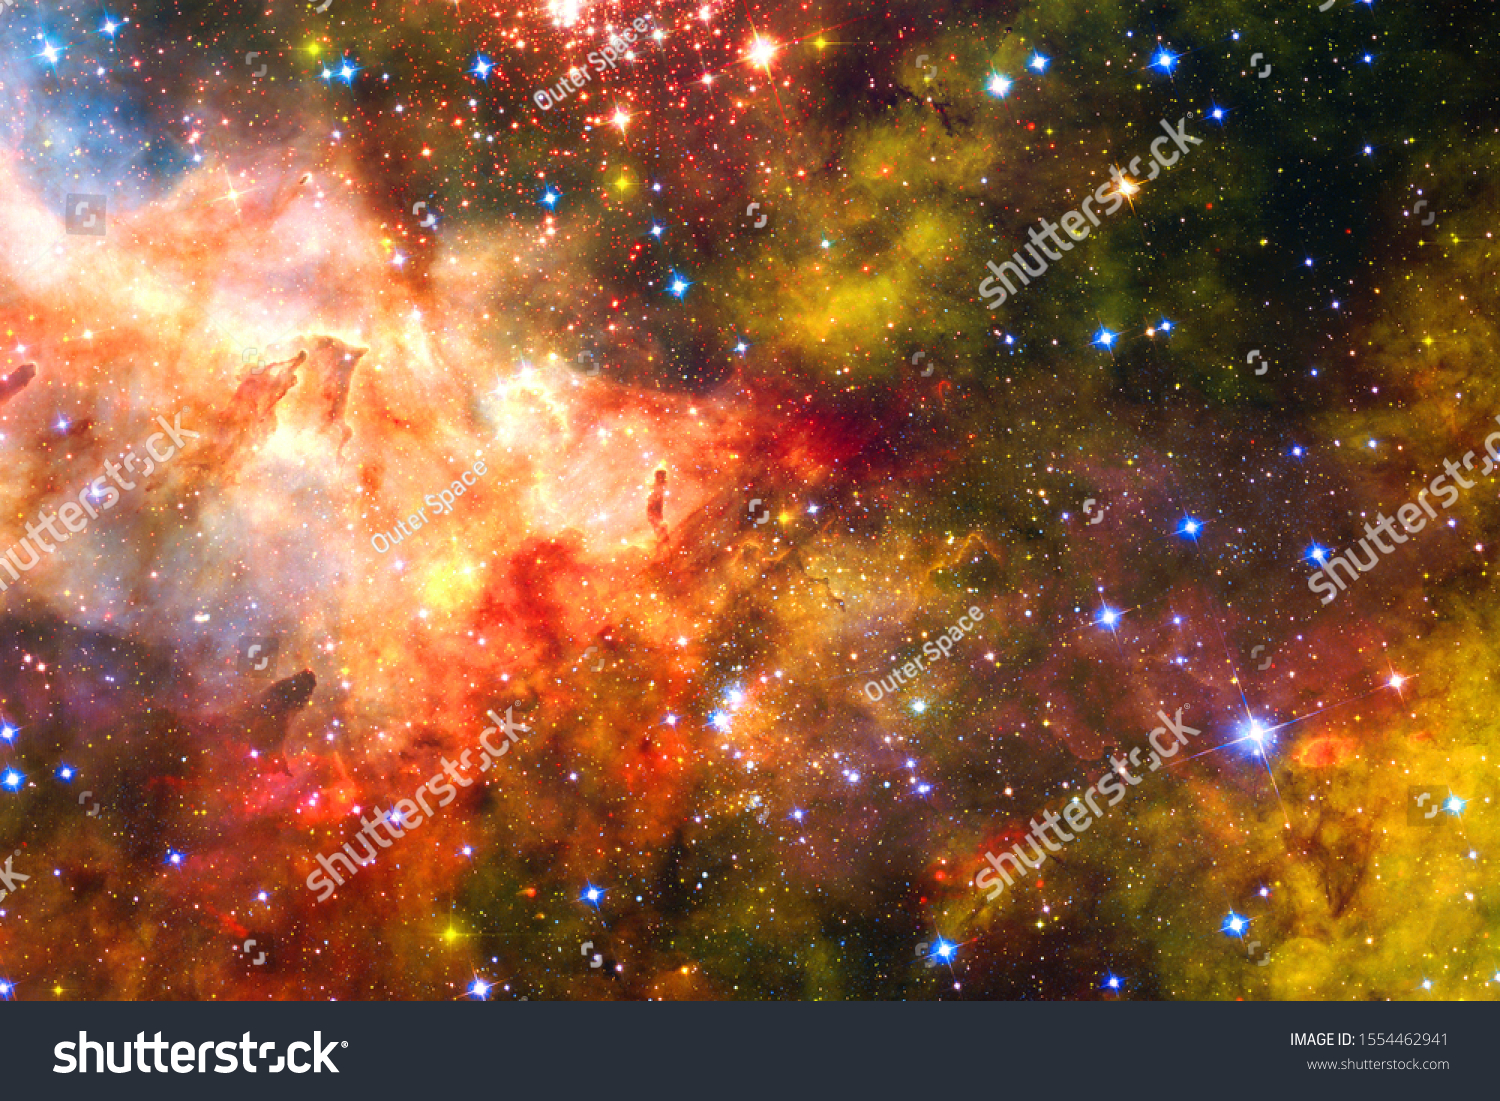 Nebula and galaxies in space. Elements of this image furnished by NASA. #1554462941